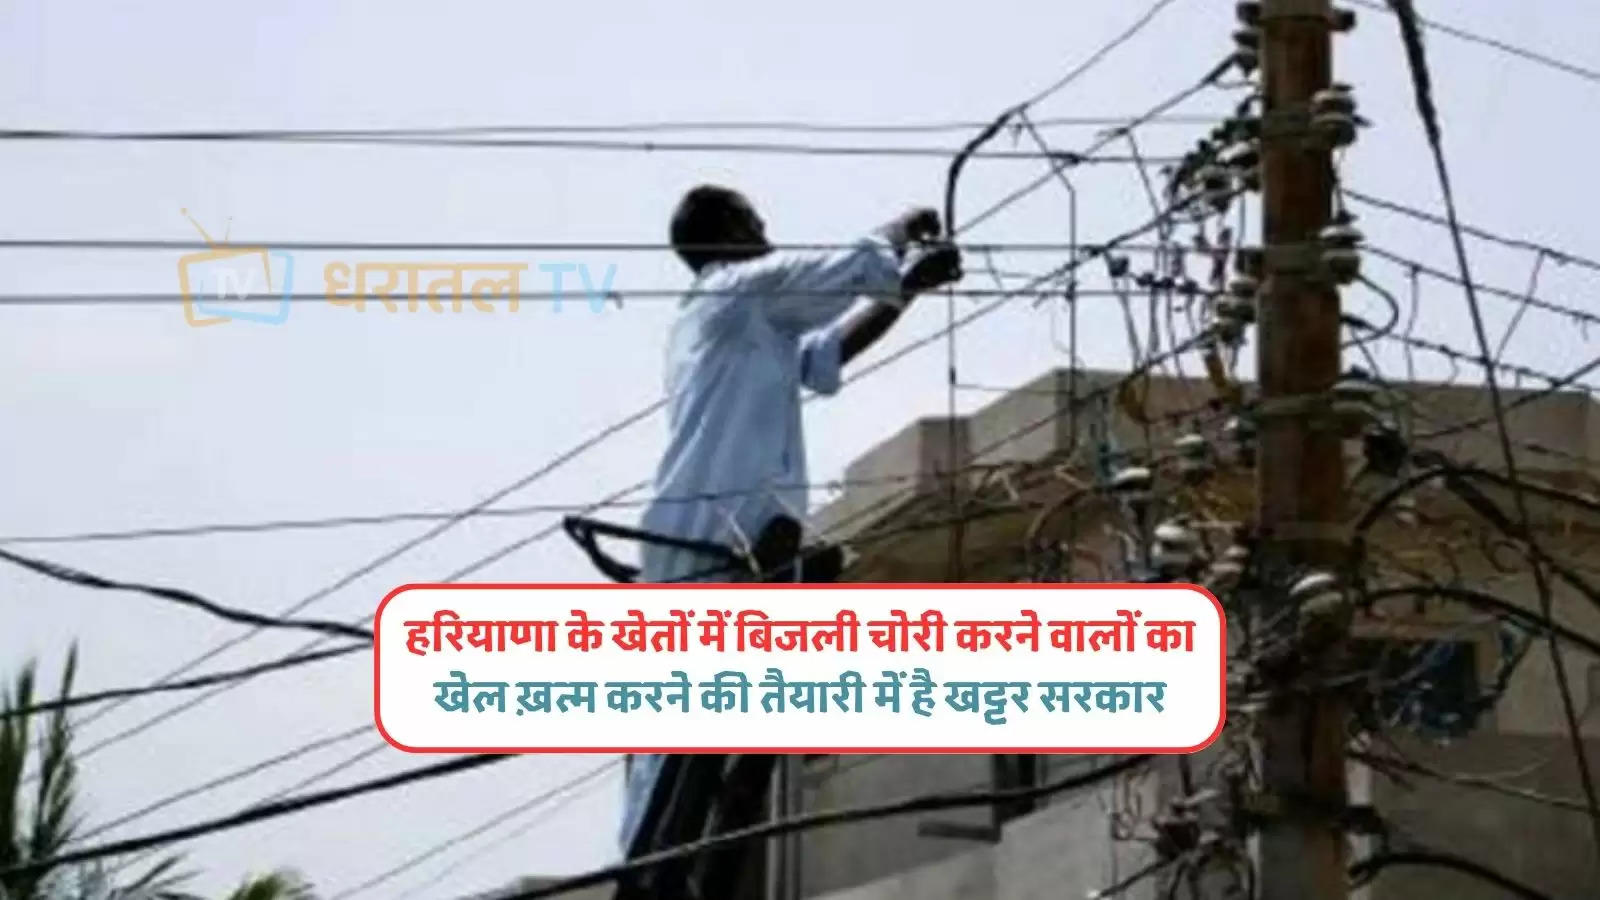 thief of electricity in haRYANA